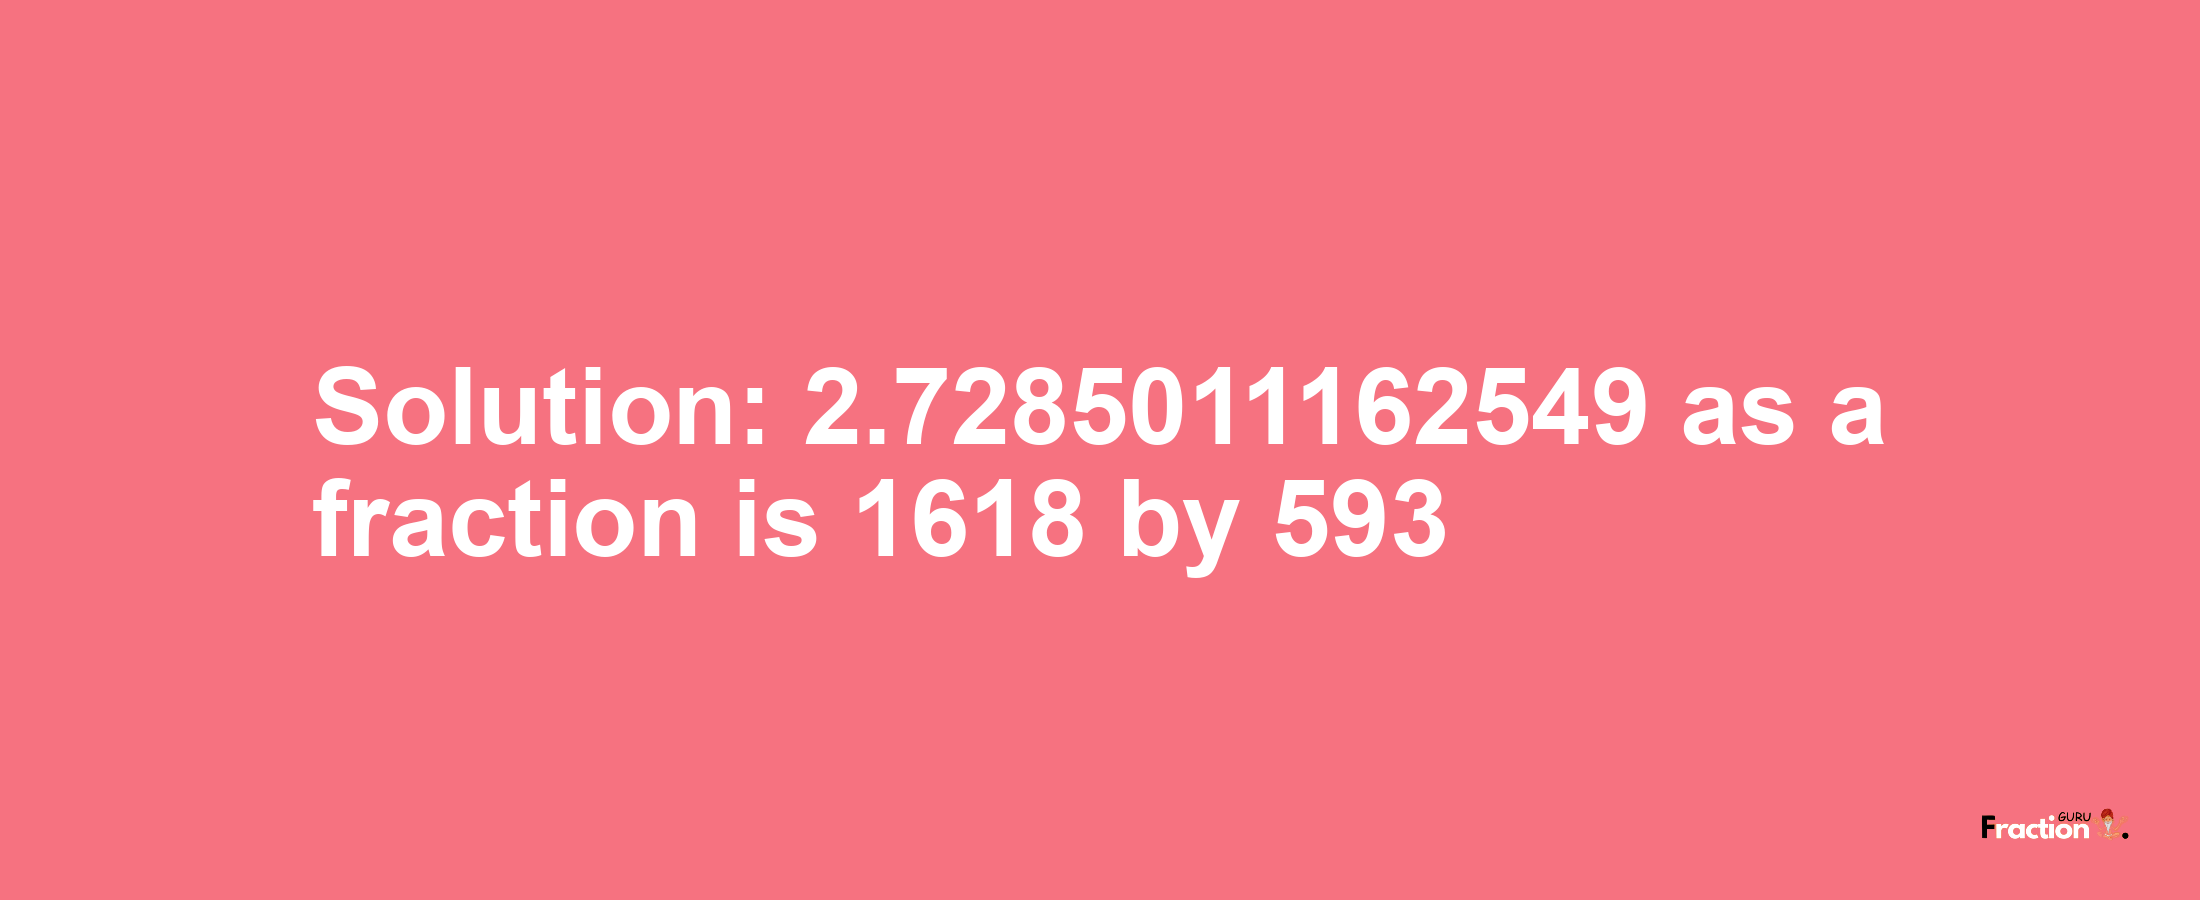 Solution:2.7285011162549 as a fraction is 1618/593